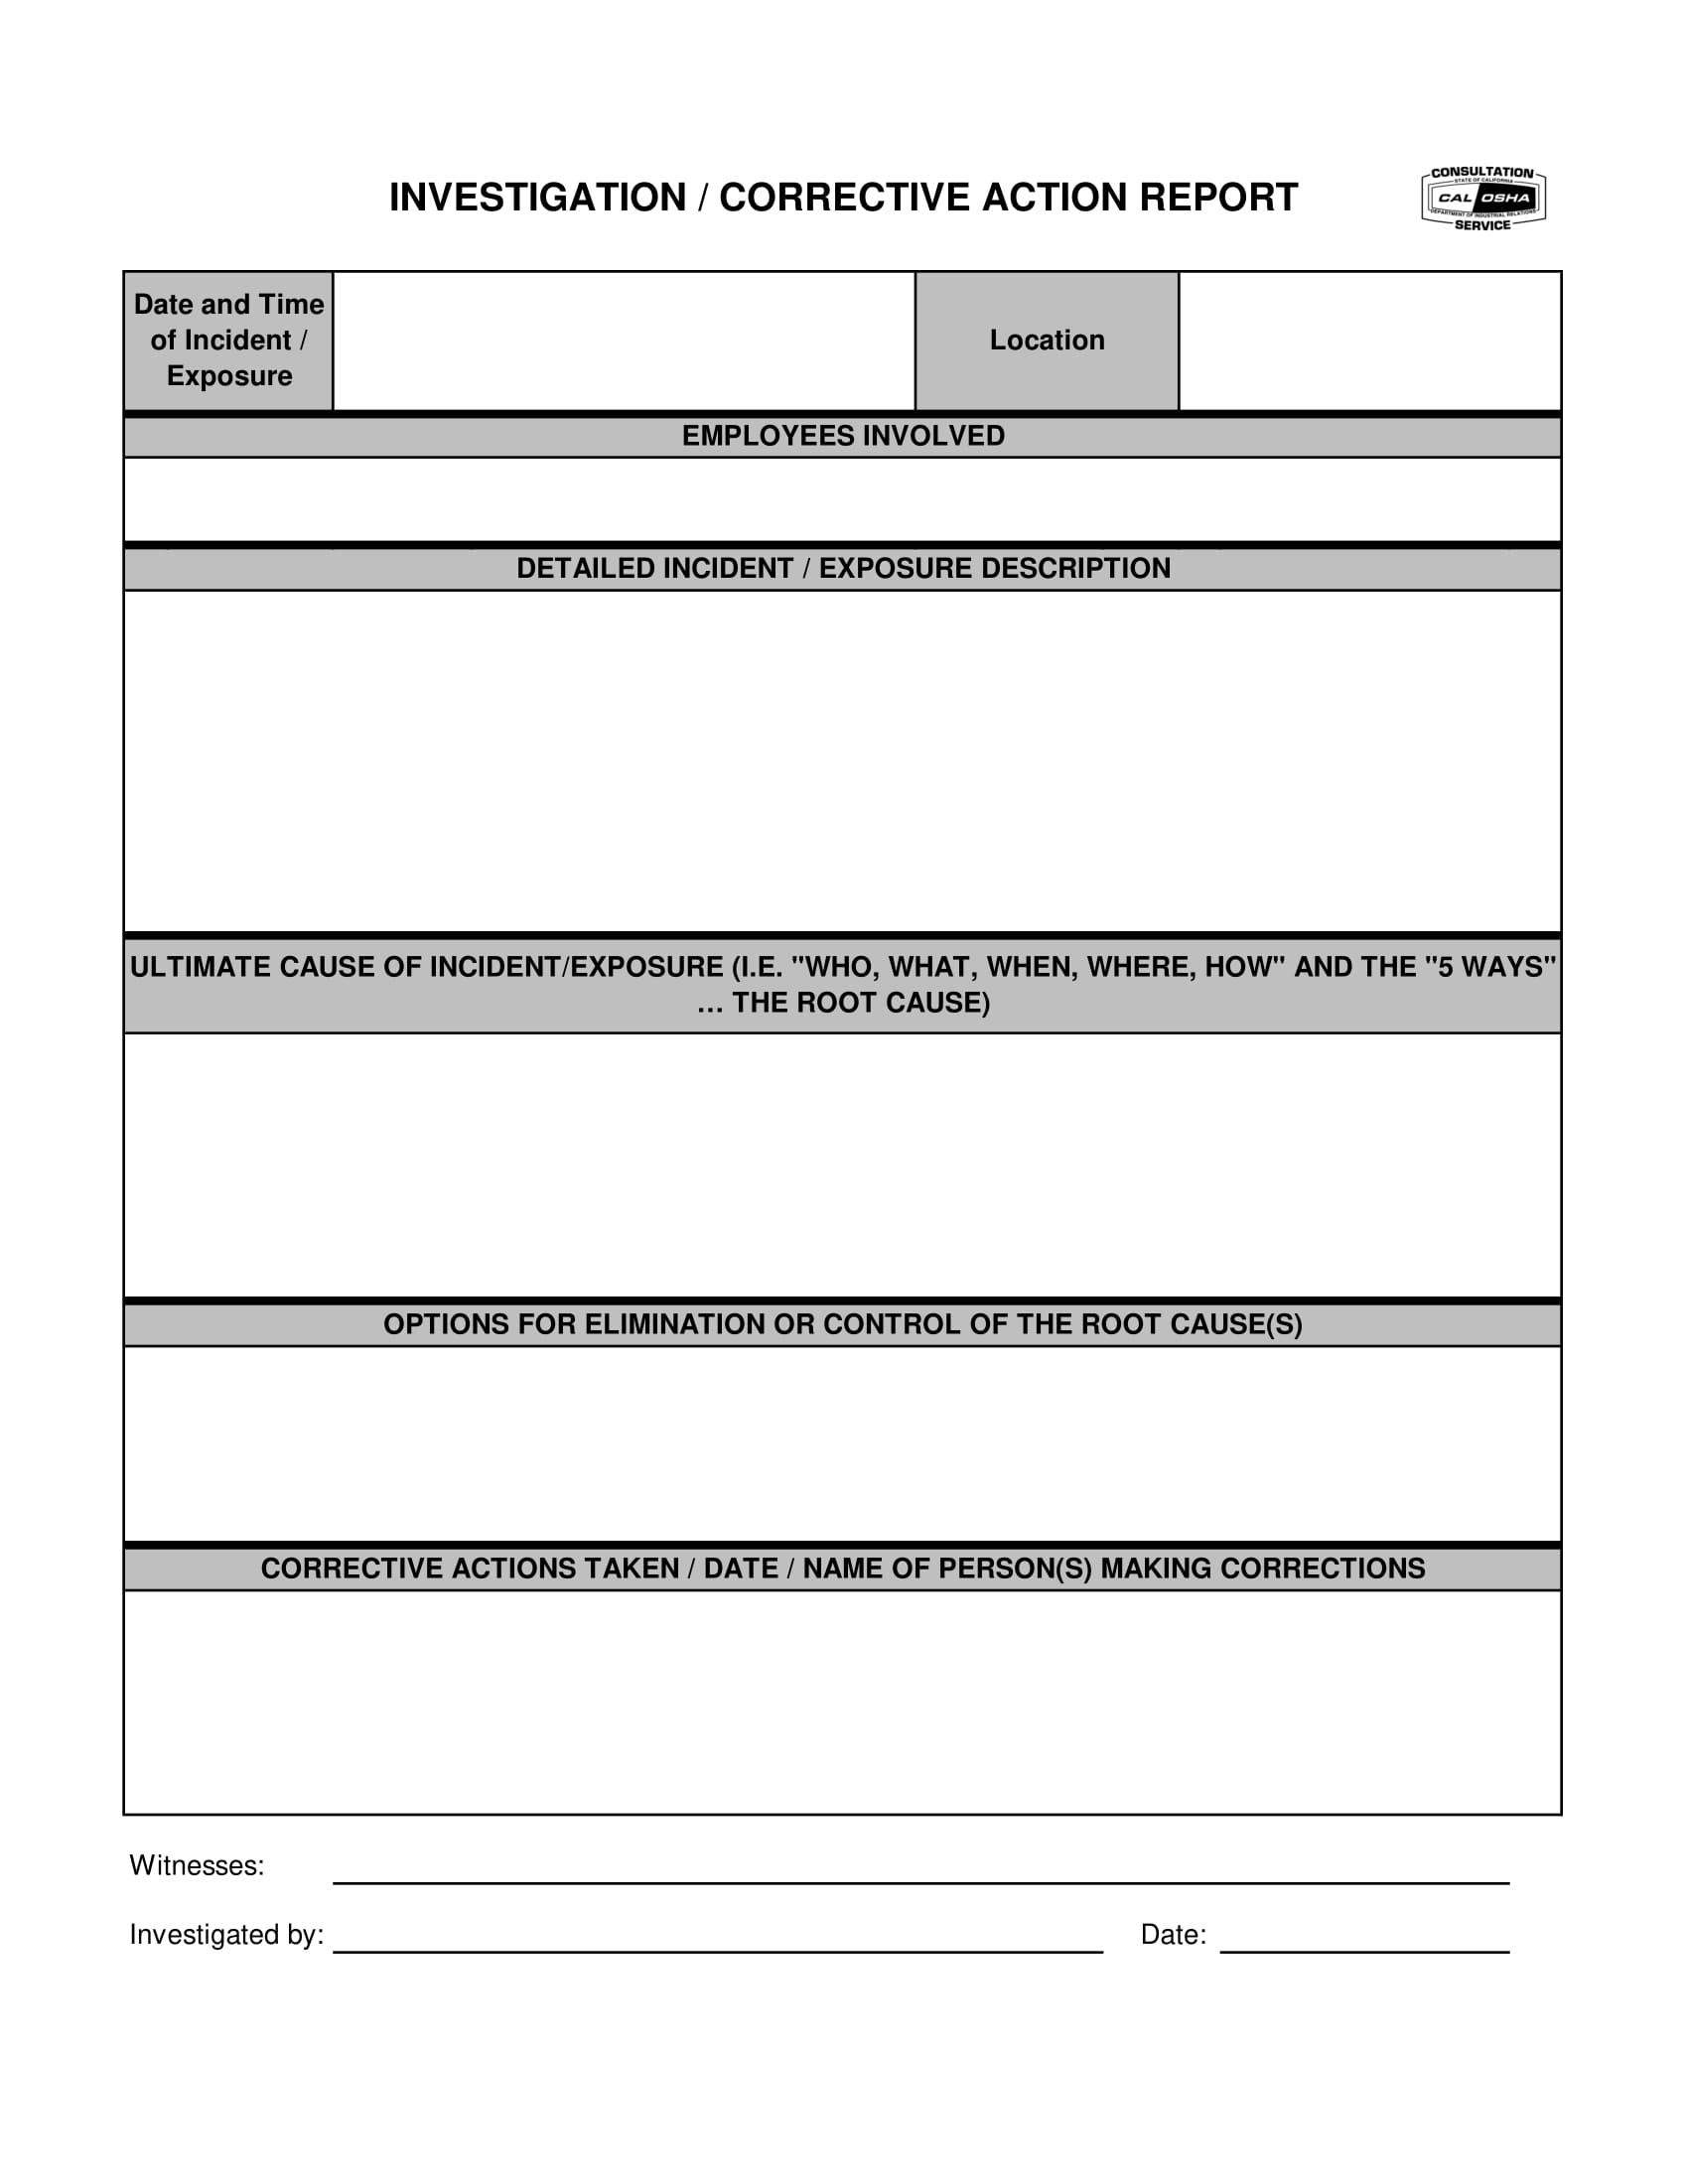 21+ Corrective Action Report Examples - MS Word  Pages  Google With Corrective Action Report Template